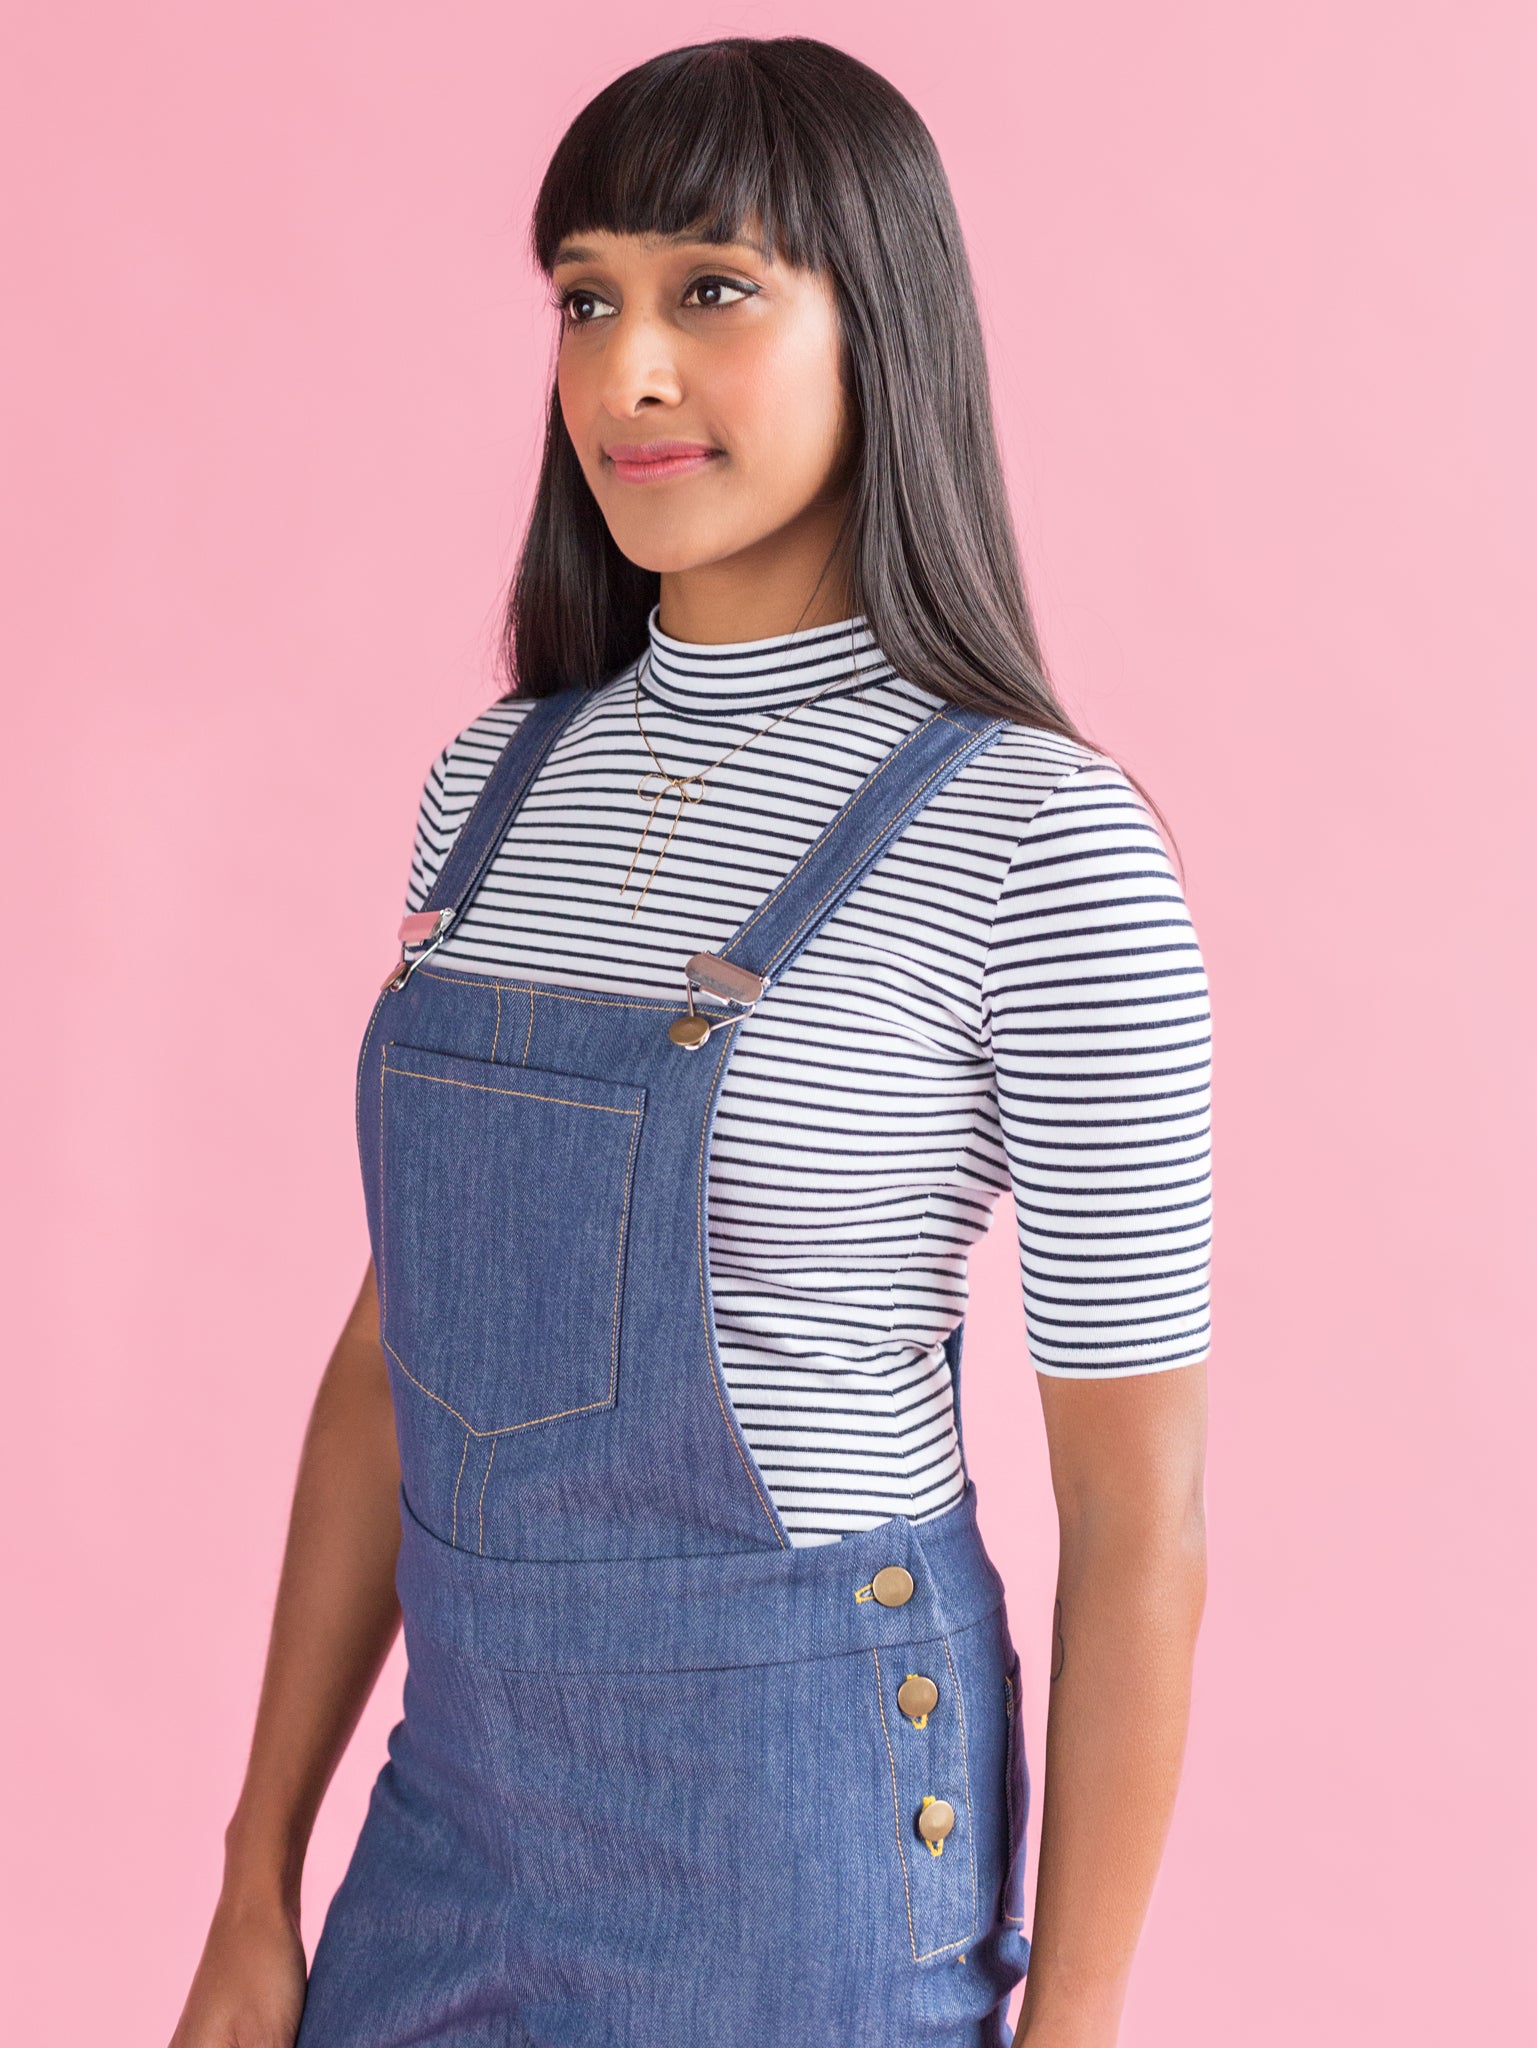 Tilly and the Buttons - Mila Dungarees Sewing Pattern